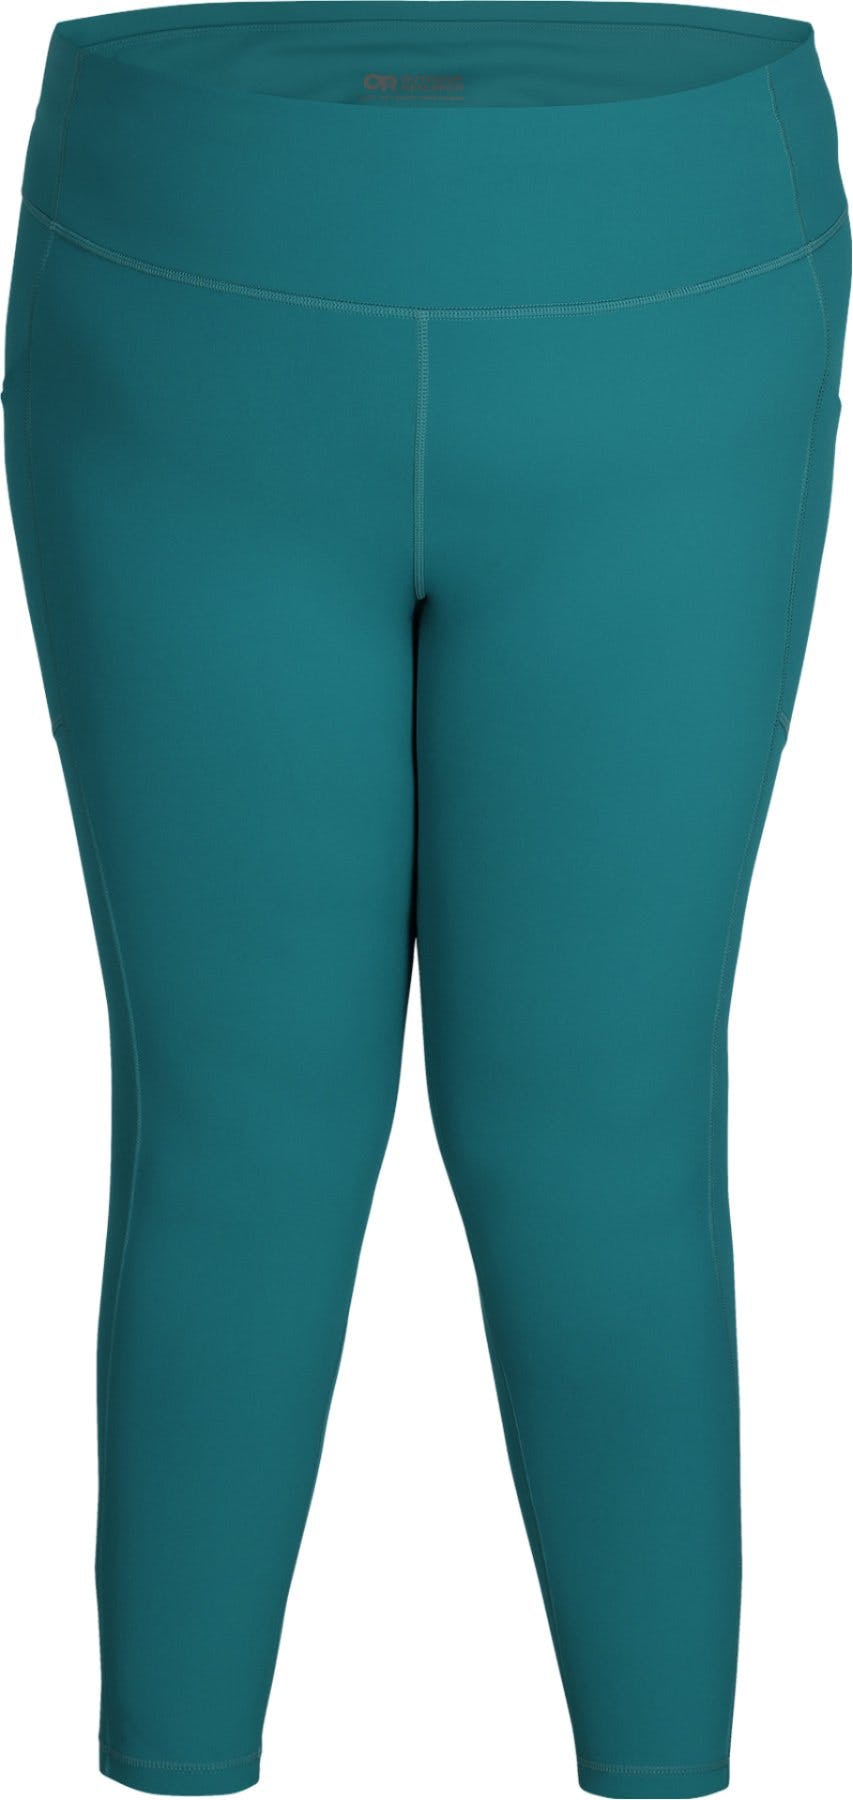 Product image for Vantage Plus Size 7/8 Legging with Back Pockets - Women's